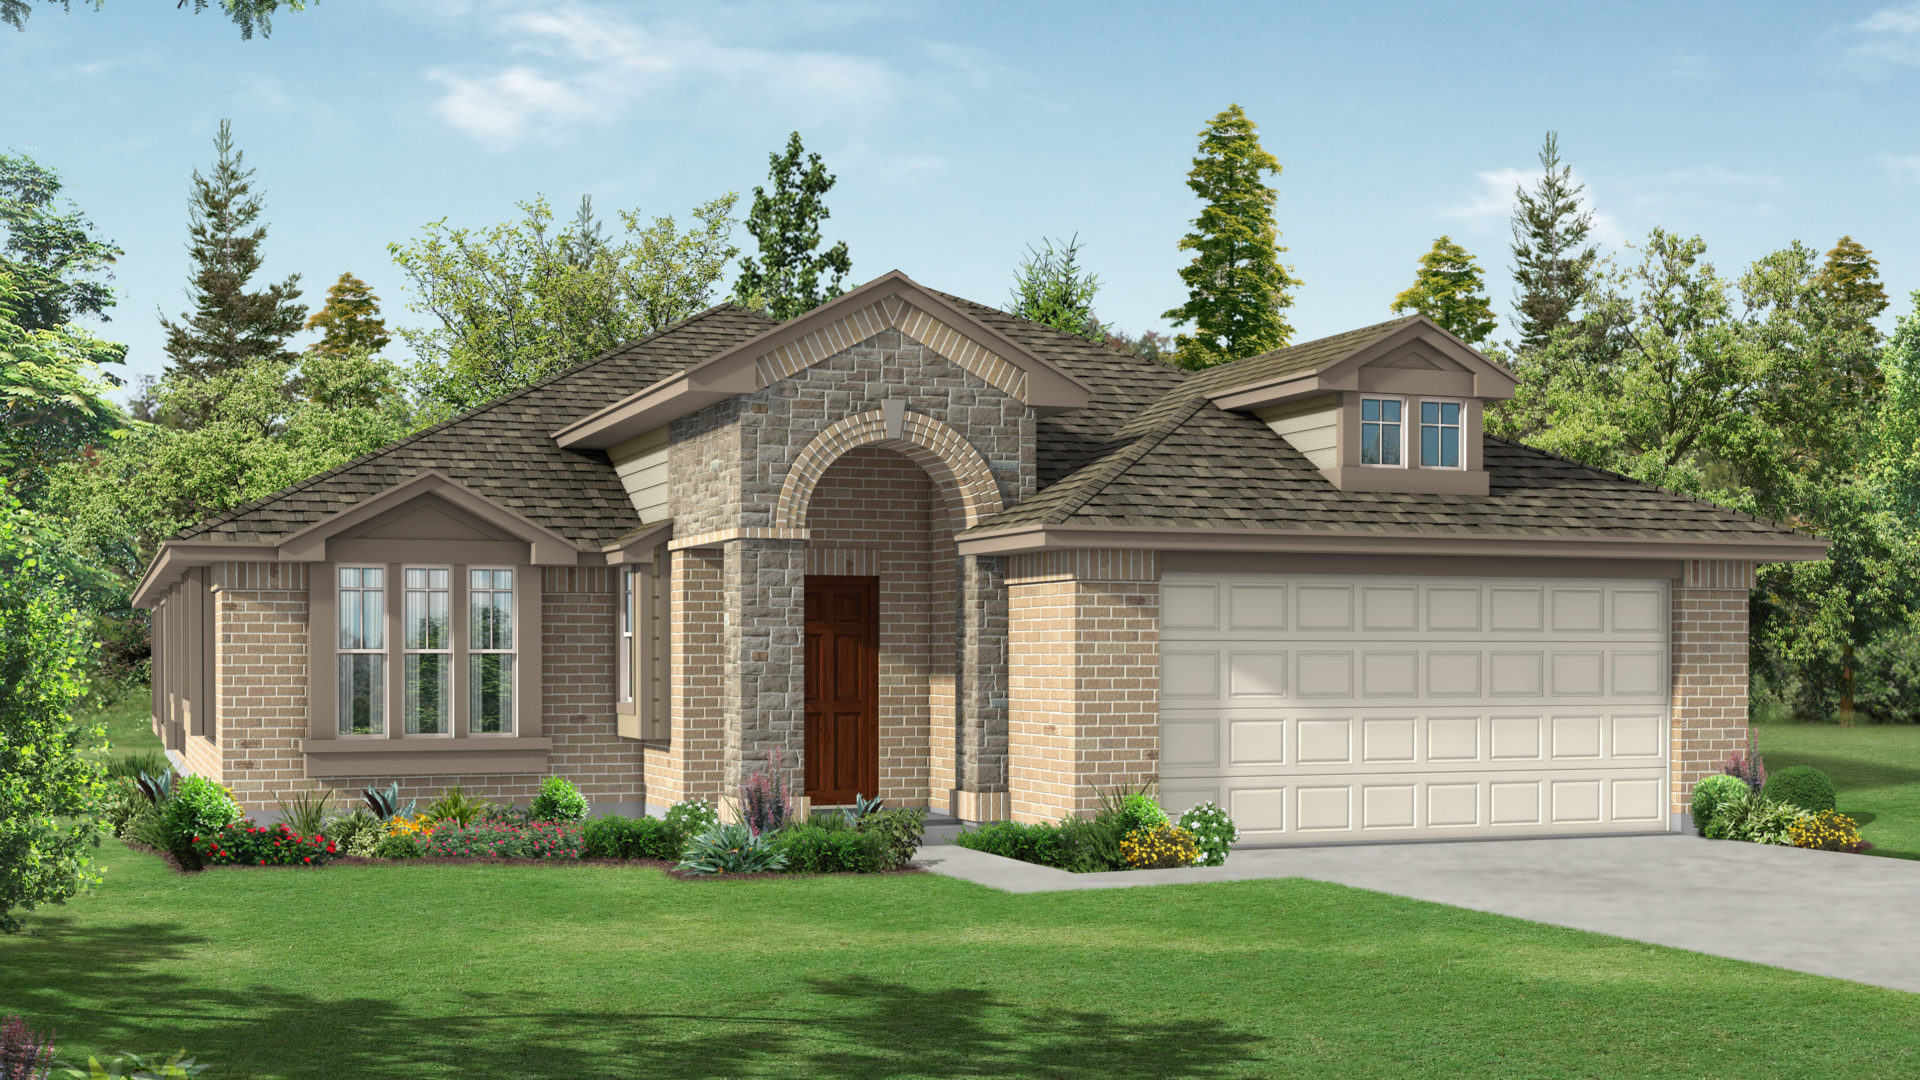 The Coral Cay Craftsman Series Elevation A Star Ranch New Homes in Hutto